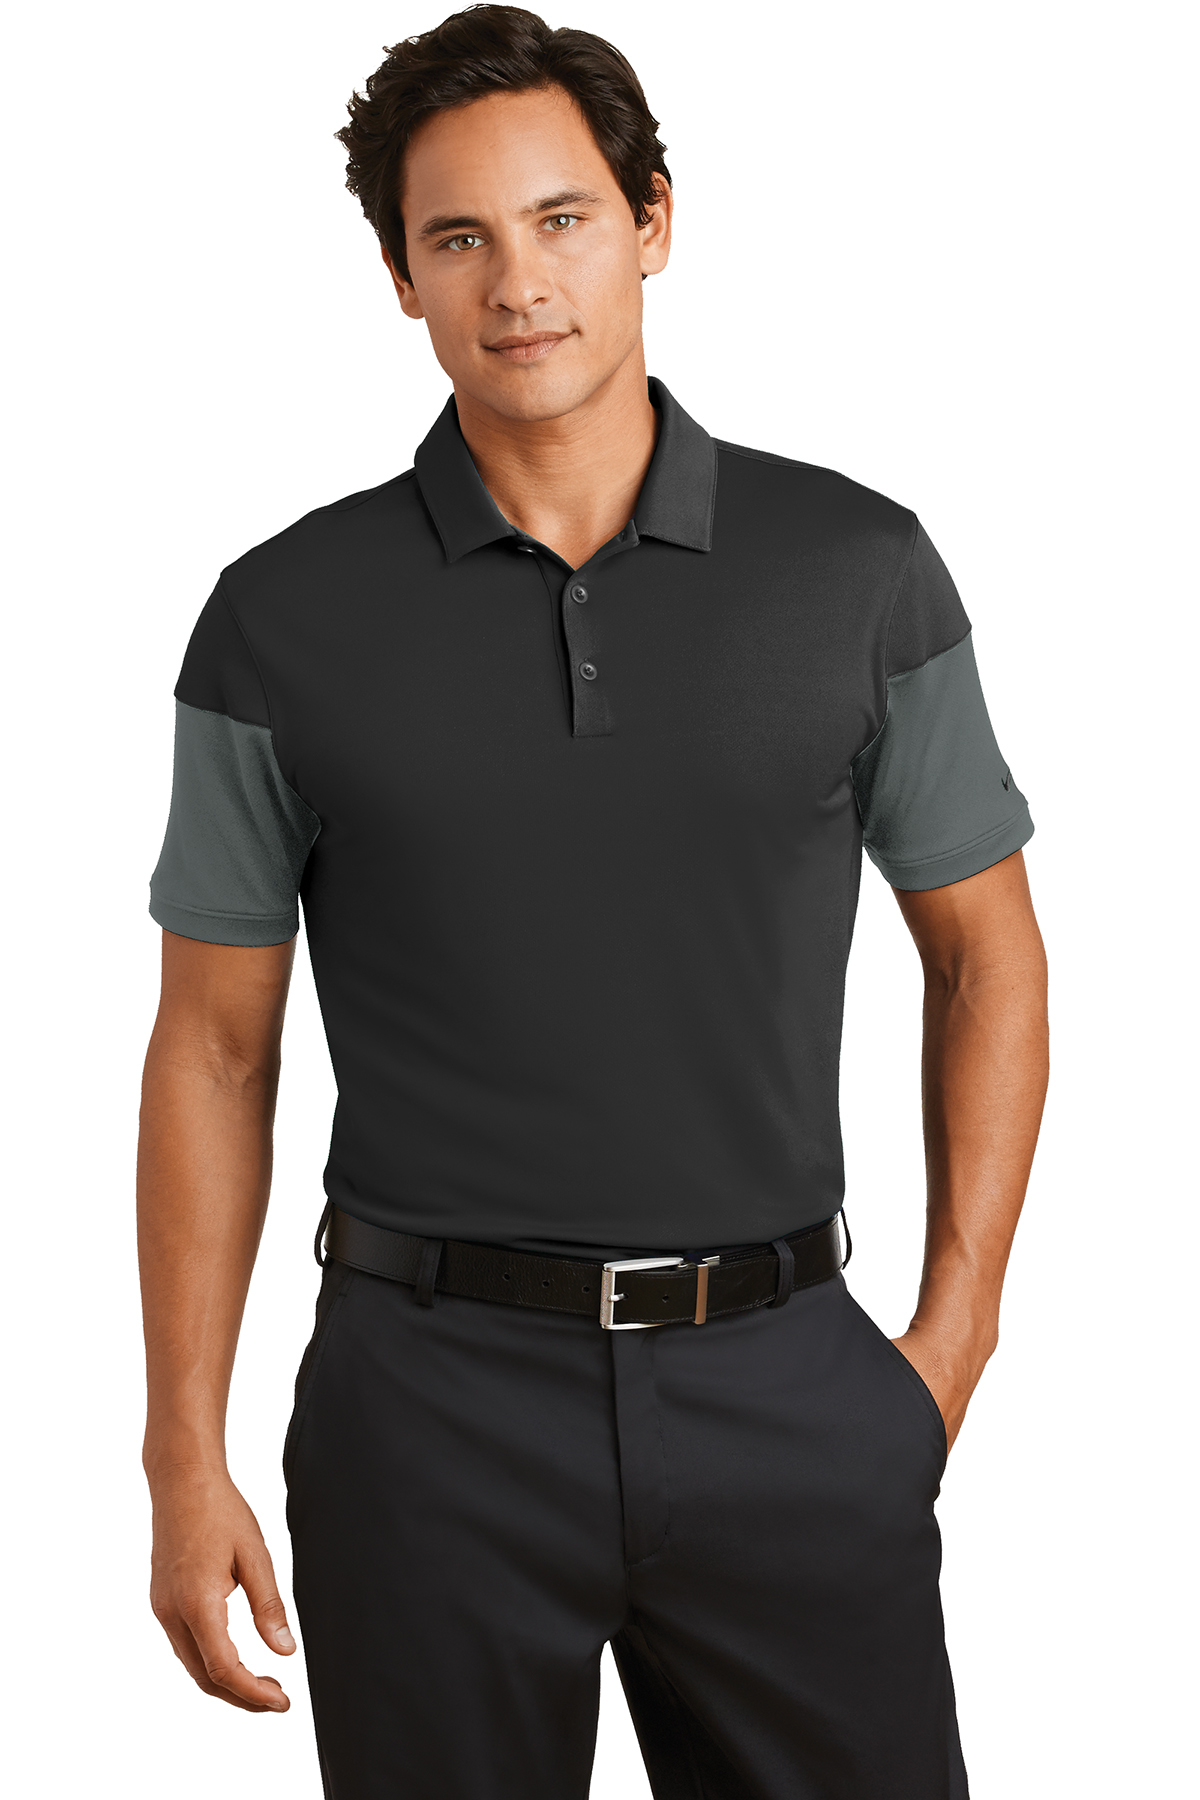 Nike Dri-FIT Sleeve Colorblock Modern Fit Polo | Product | SanMar